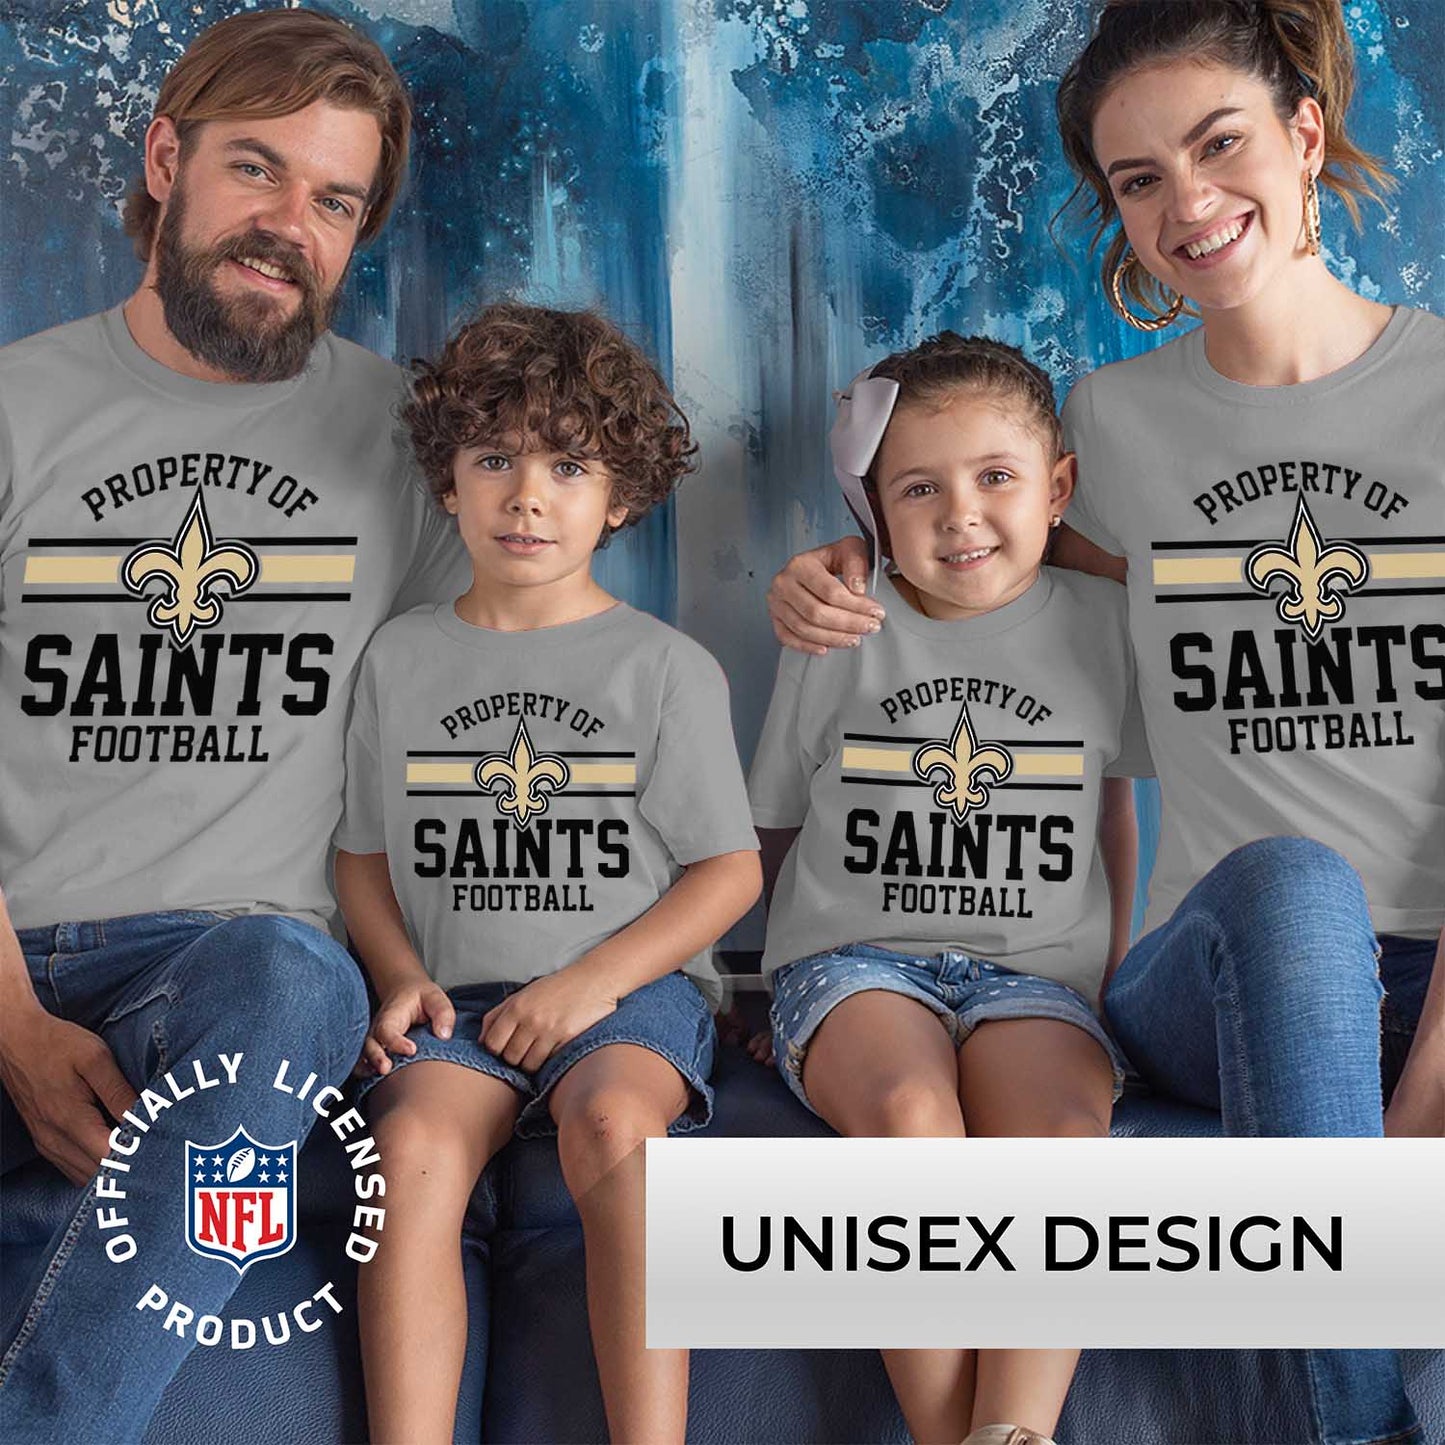 New Orleans Saints NFL Youth Property Of Short Sleeve Lightweight T Shirt - Sport Gray